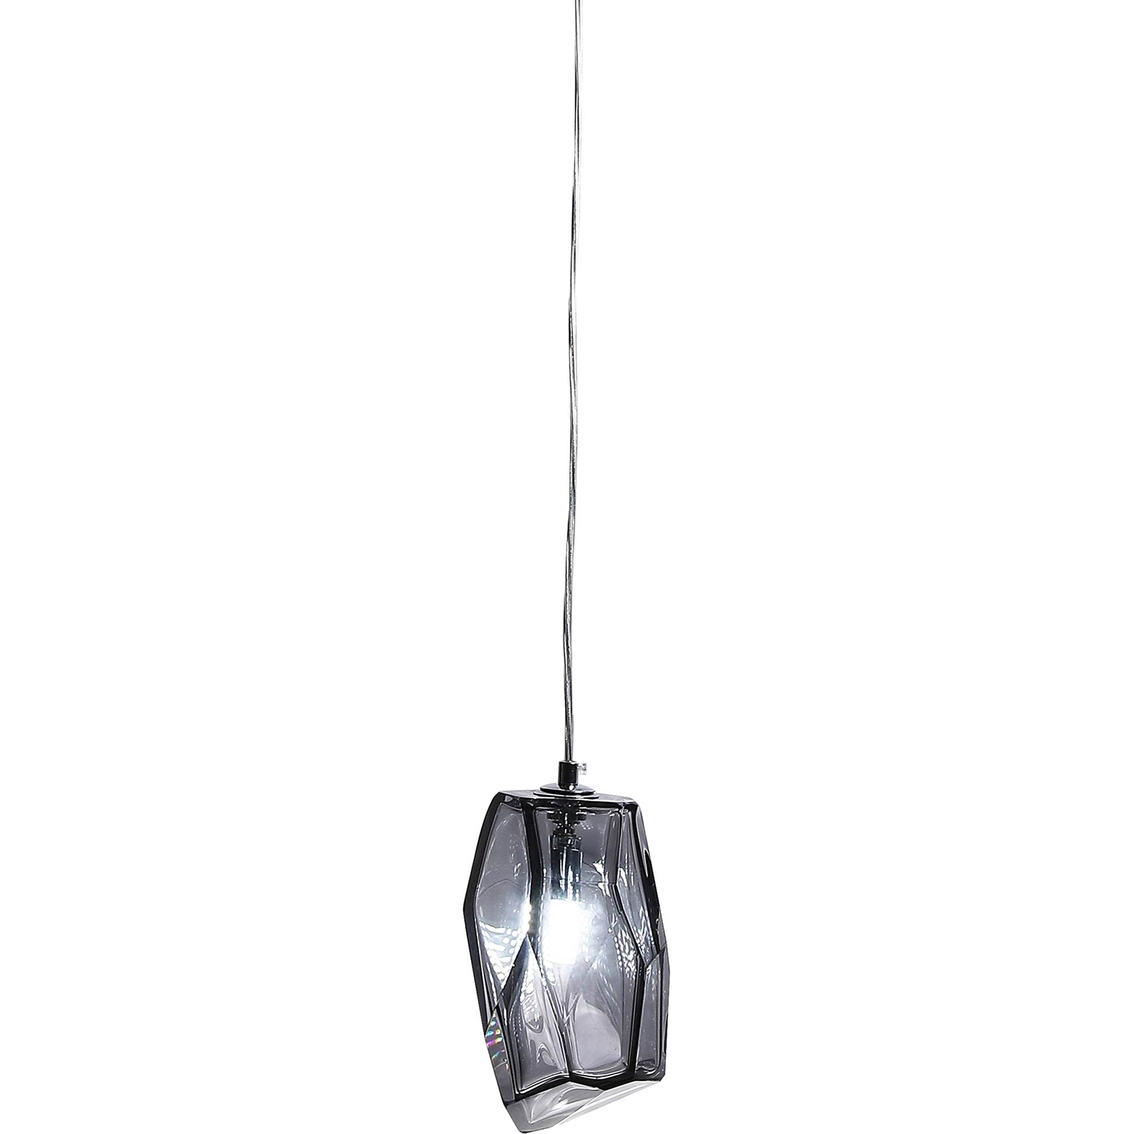 Dale Tiffany 52 in. Altair Smoke Handcrafted Art Glass Mini Pendant Light